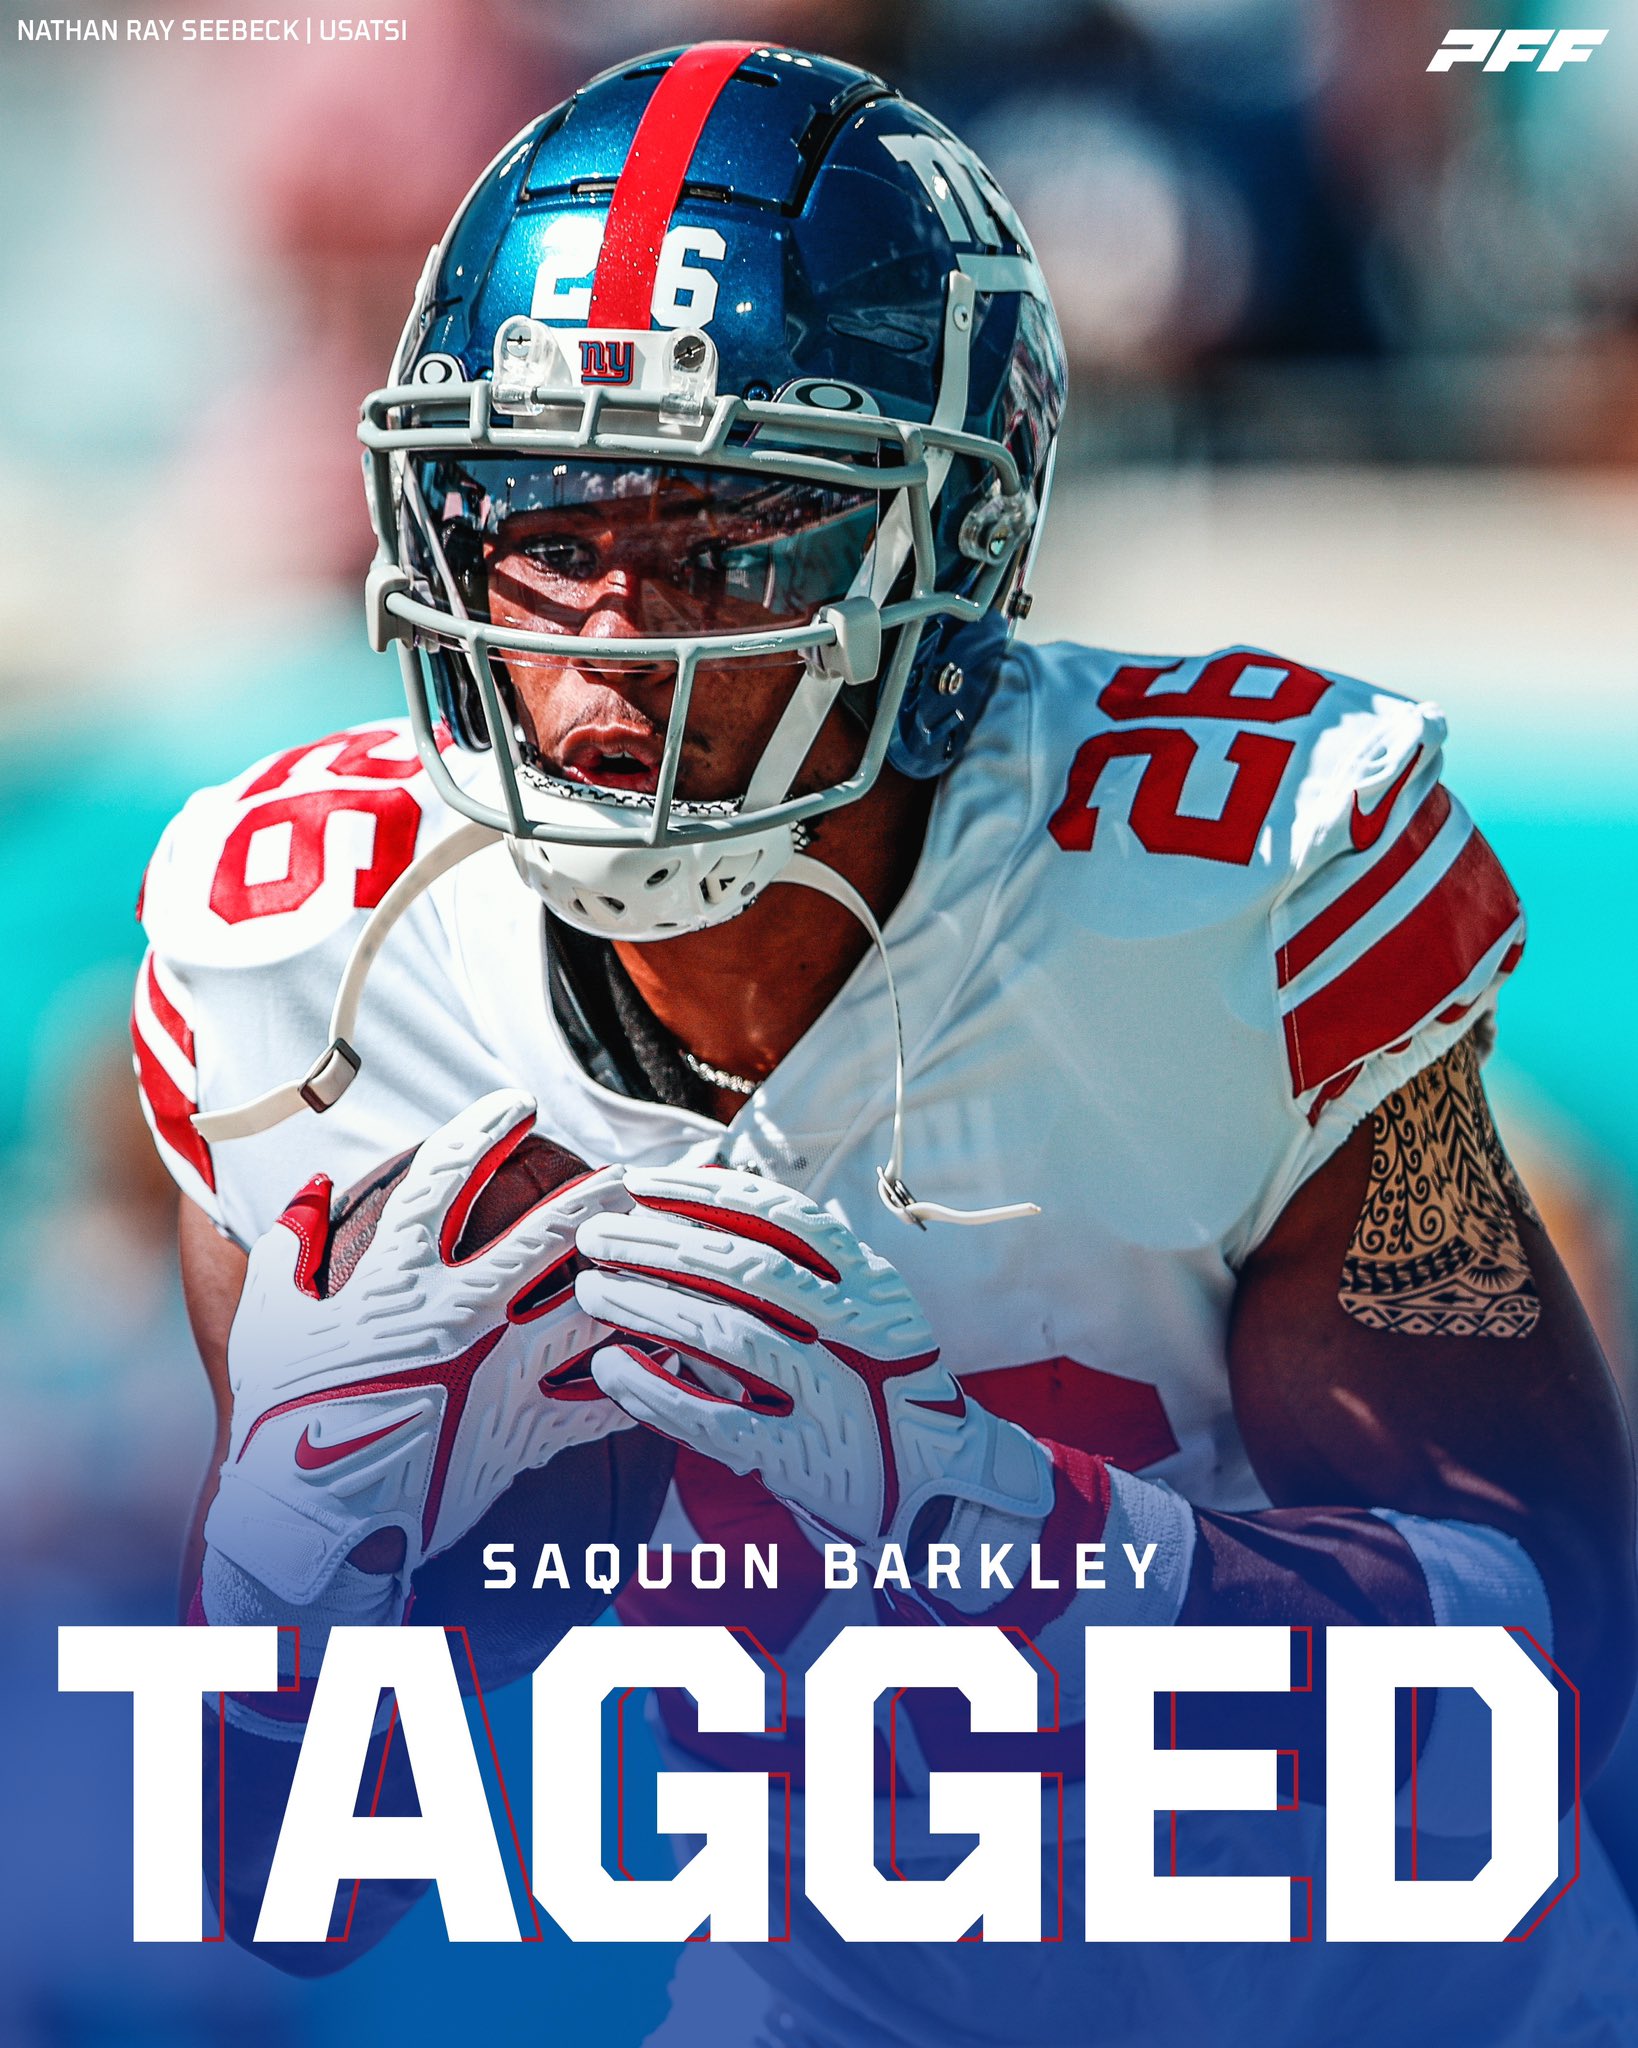 PFF on X: 'The Giants will place the Franchise Tag on Saquon